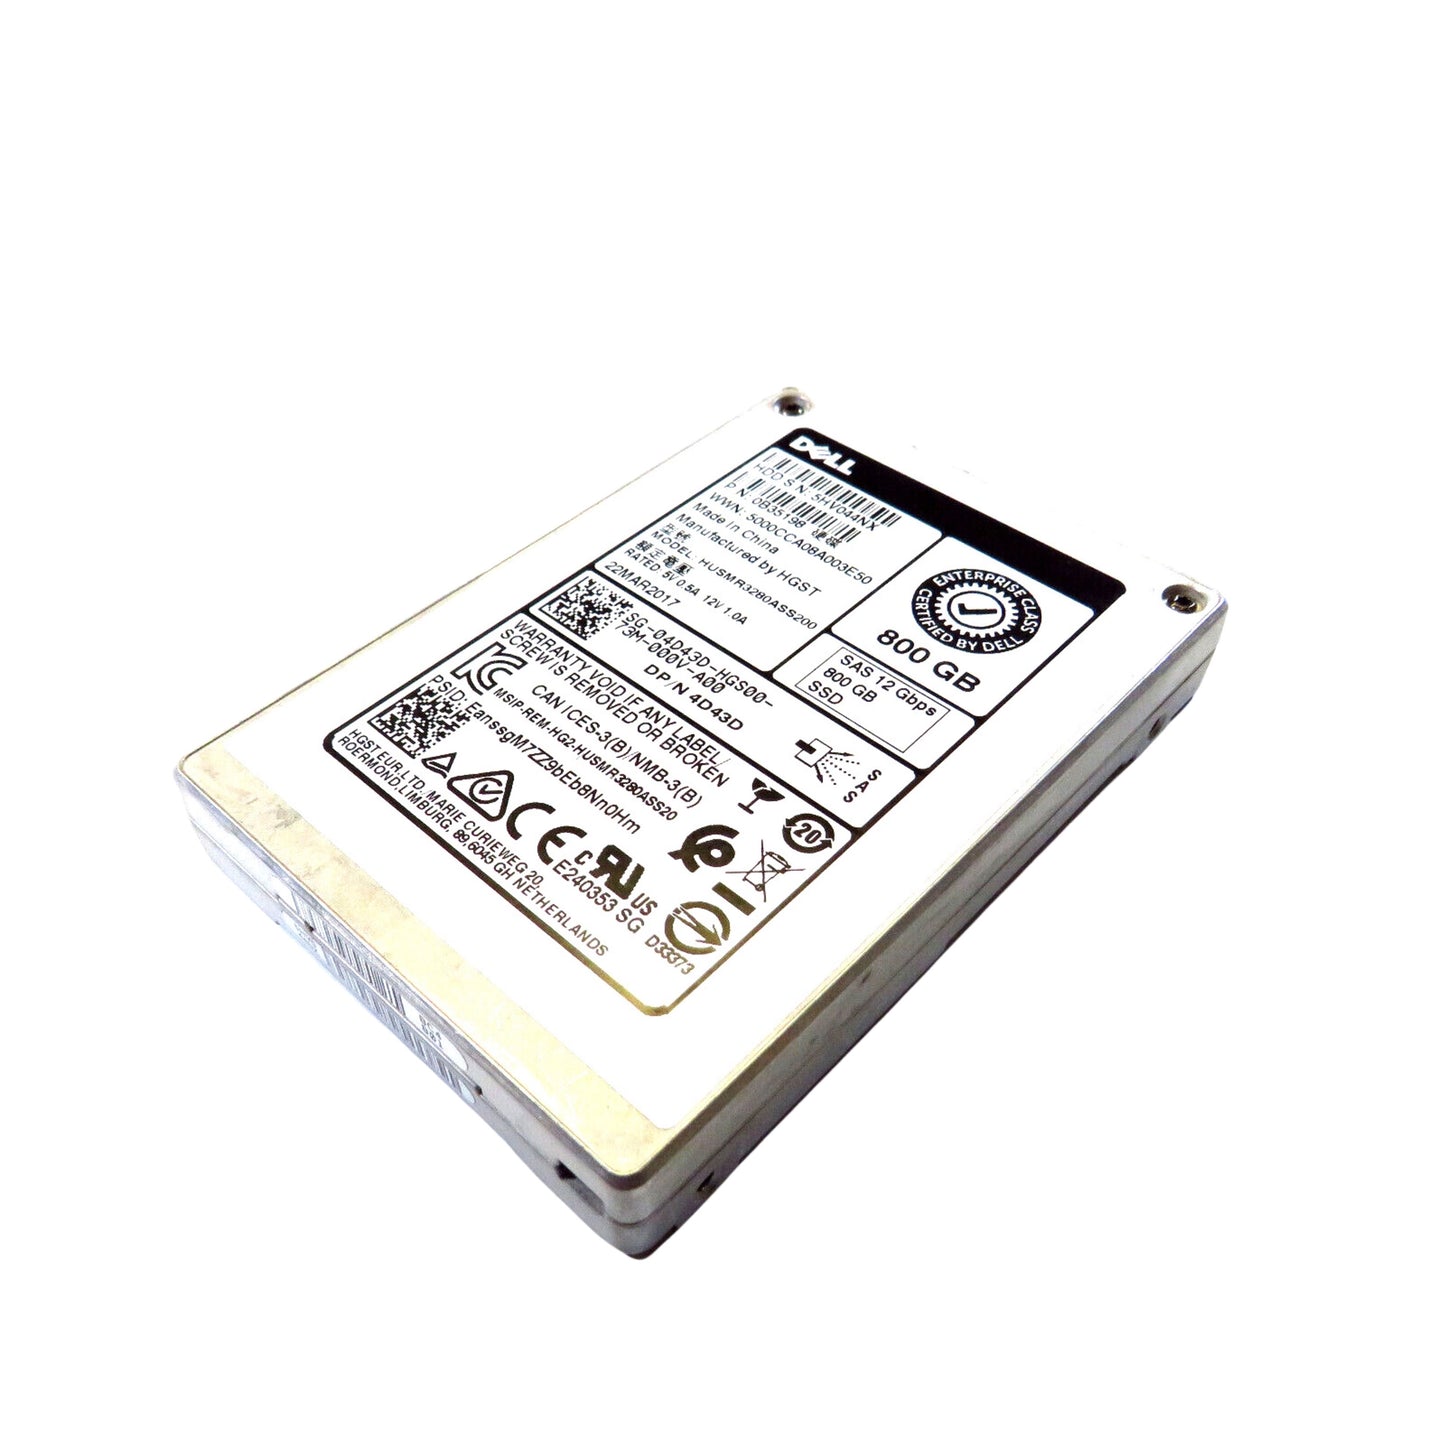 Dell 4D43D HUSMR3280ASS200 800GB 2.5" SAS 12Gbps Solid State Drive (Refurbished)